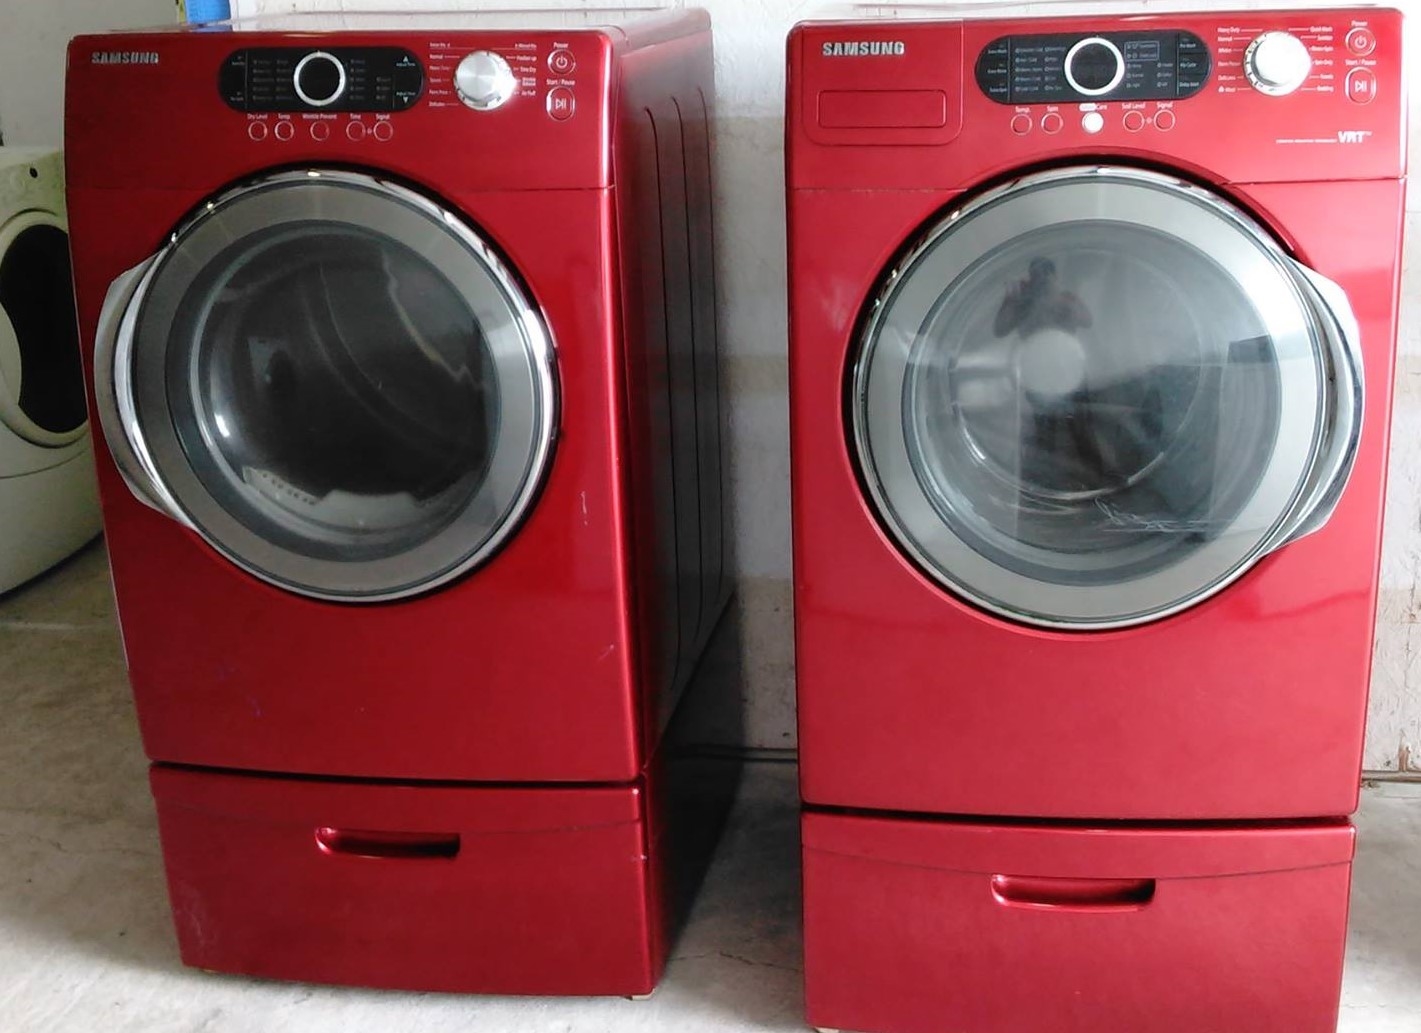 Quality Used Appliances Coupons near me in Ocala | 8coupons